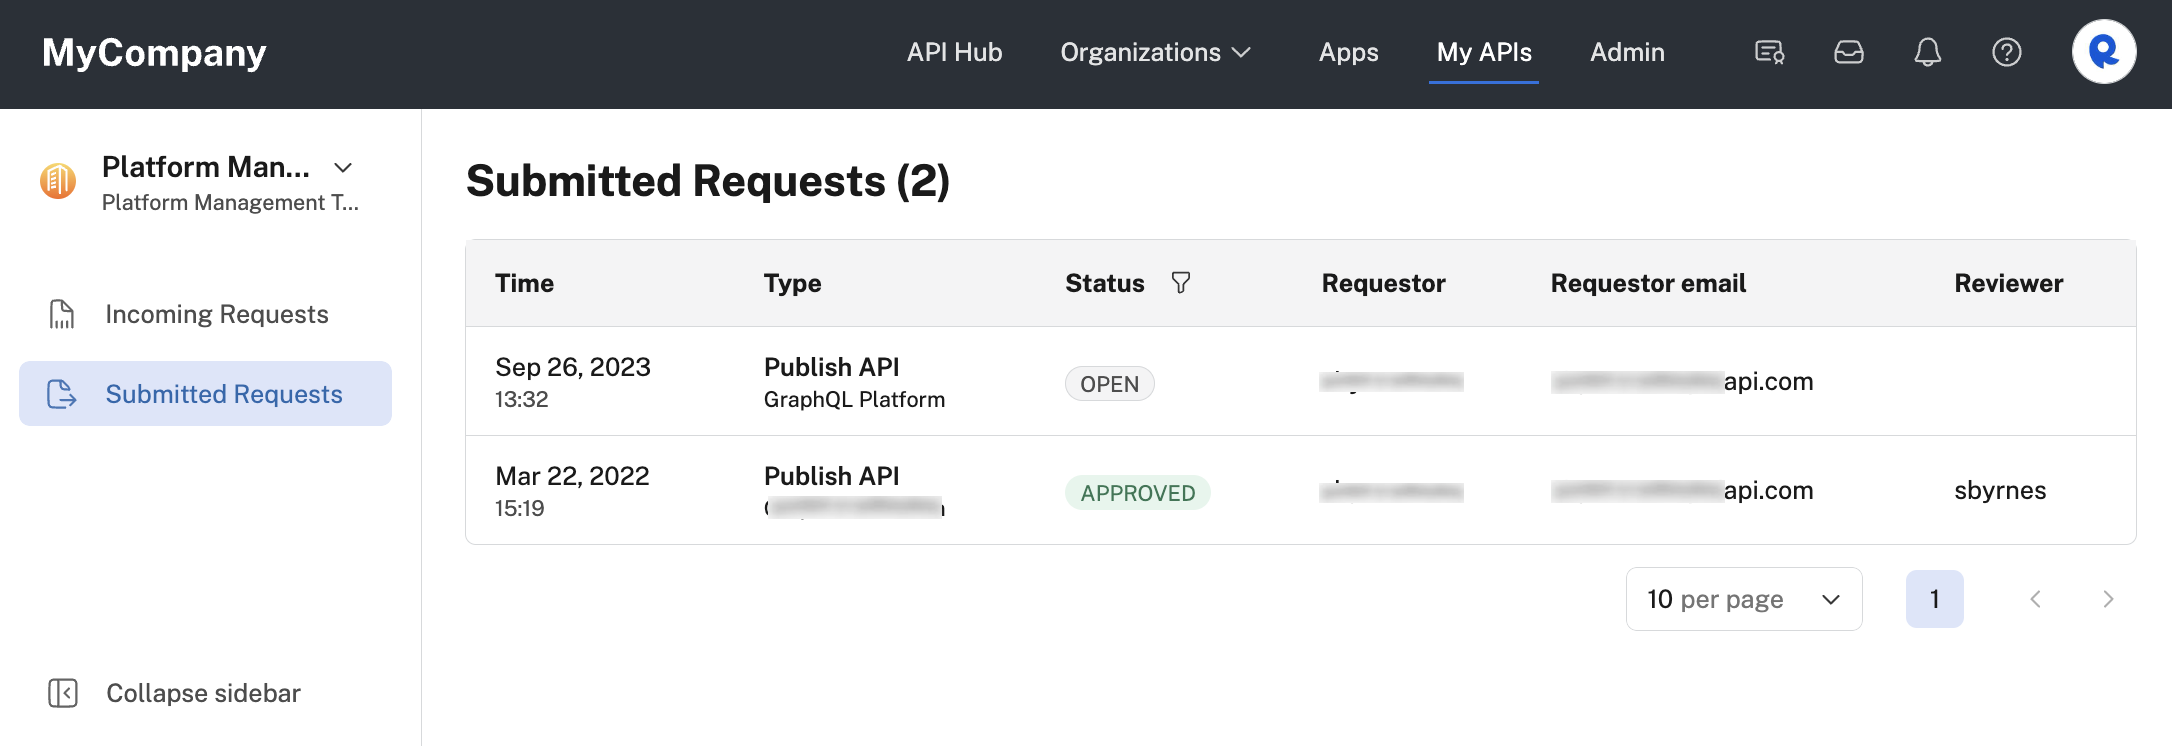 Viewing the status of requests to make my team's APIs public.